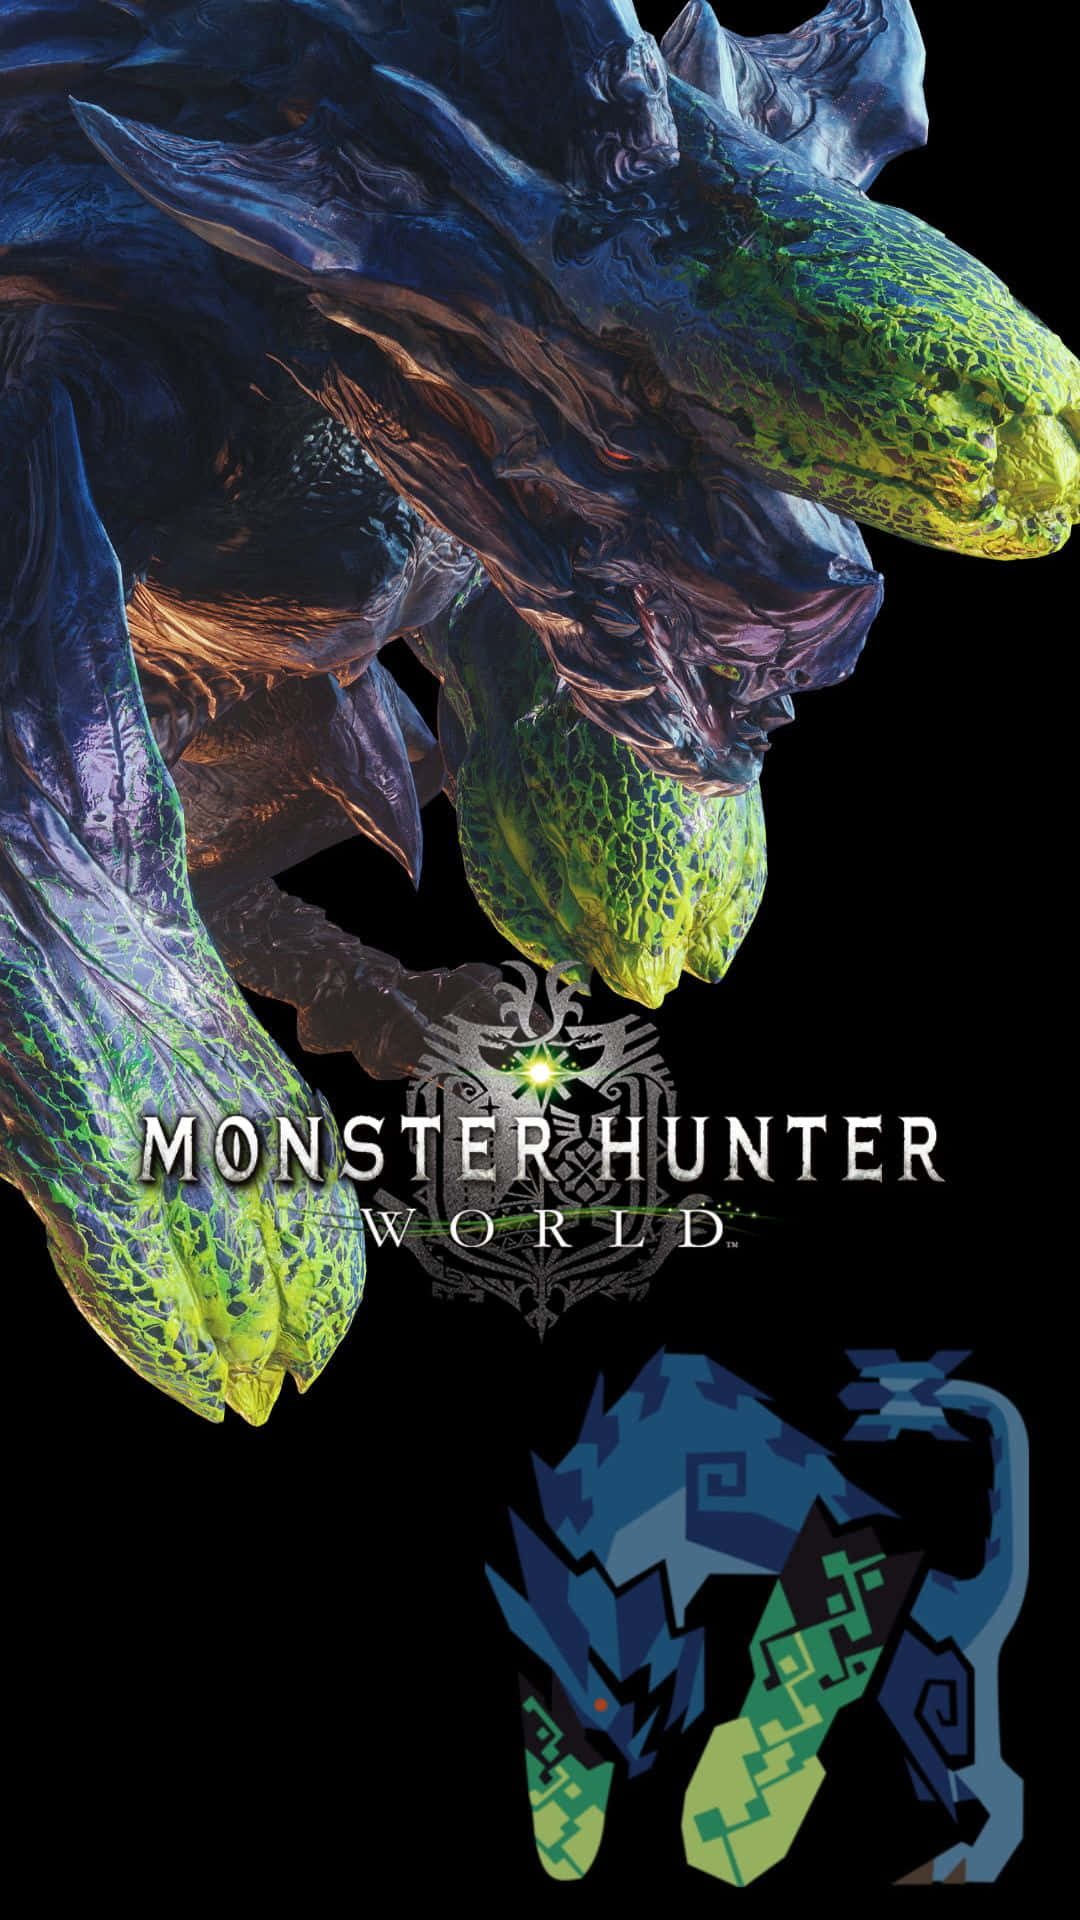 Take On Monstrous Adventures with Android Monster Hunter World